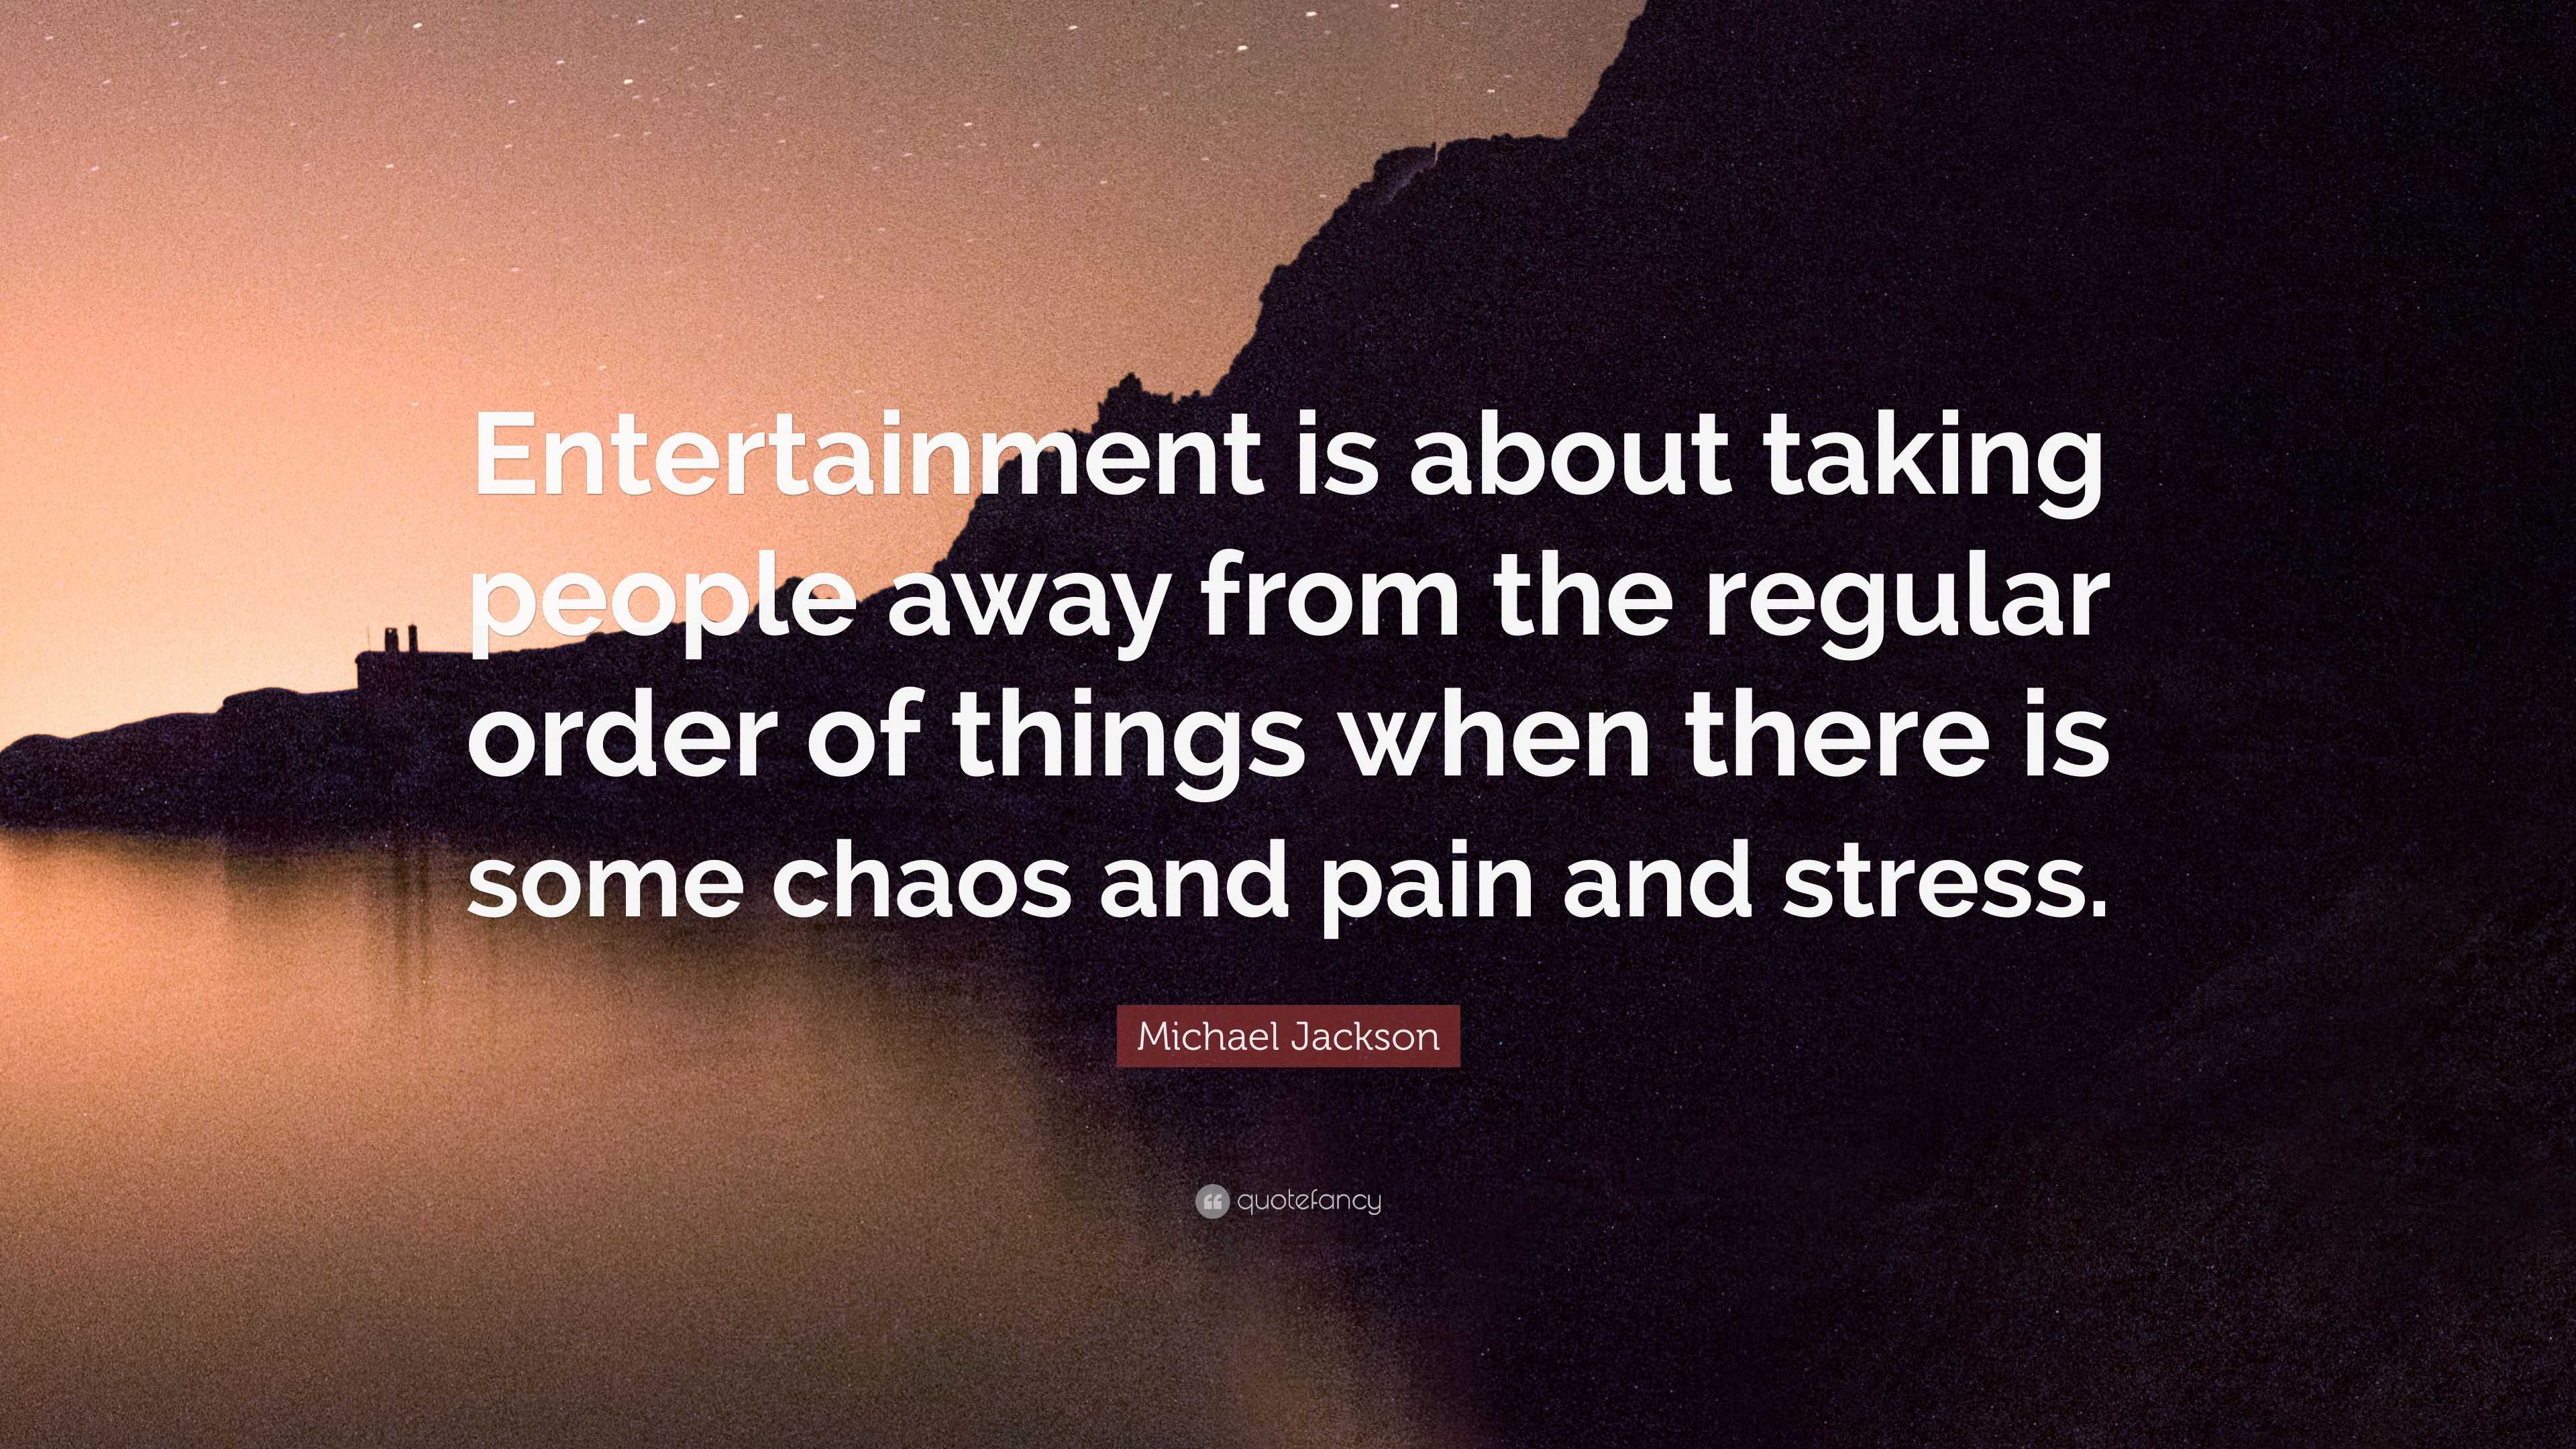 Michael Jackson Quote: “Entertainment is about taking people away from